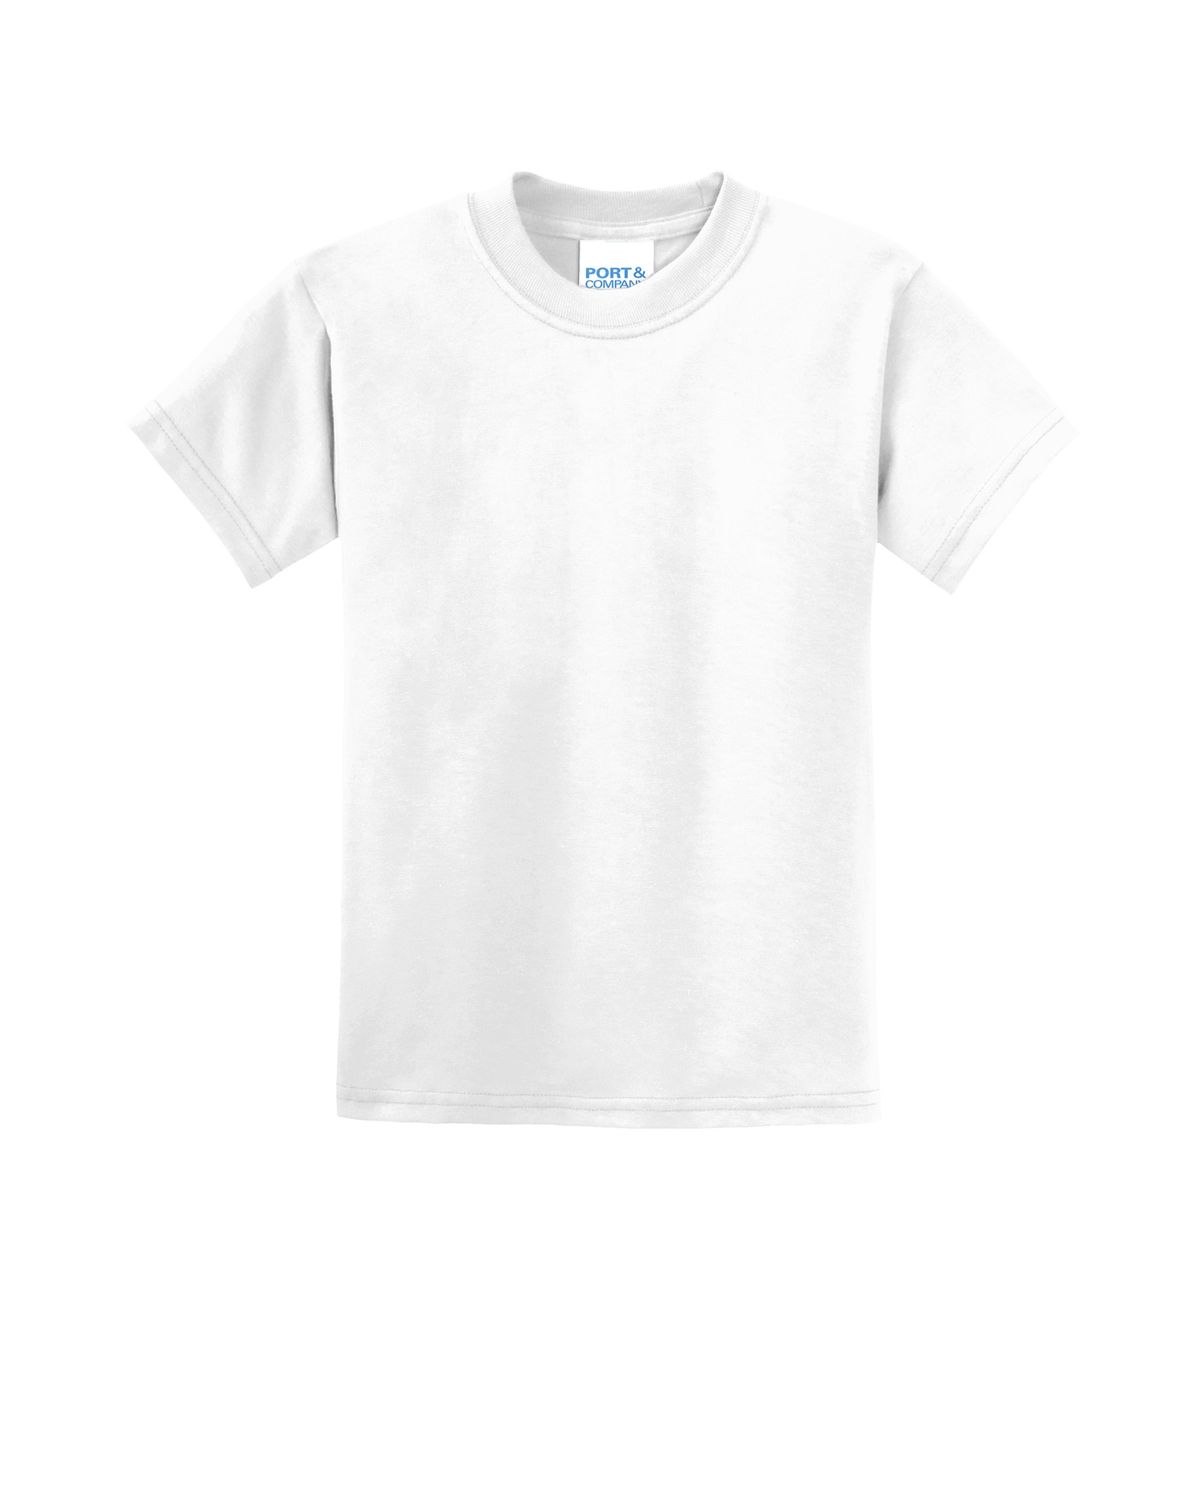 'Port & Company PC55Y Youth Core Blend Tee'